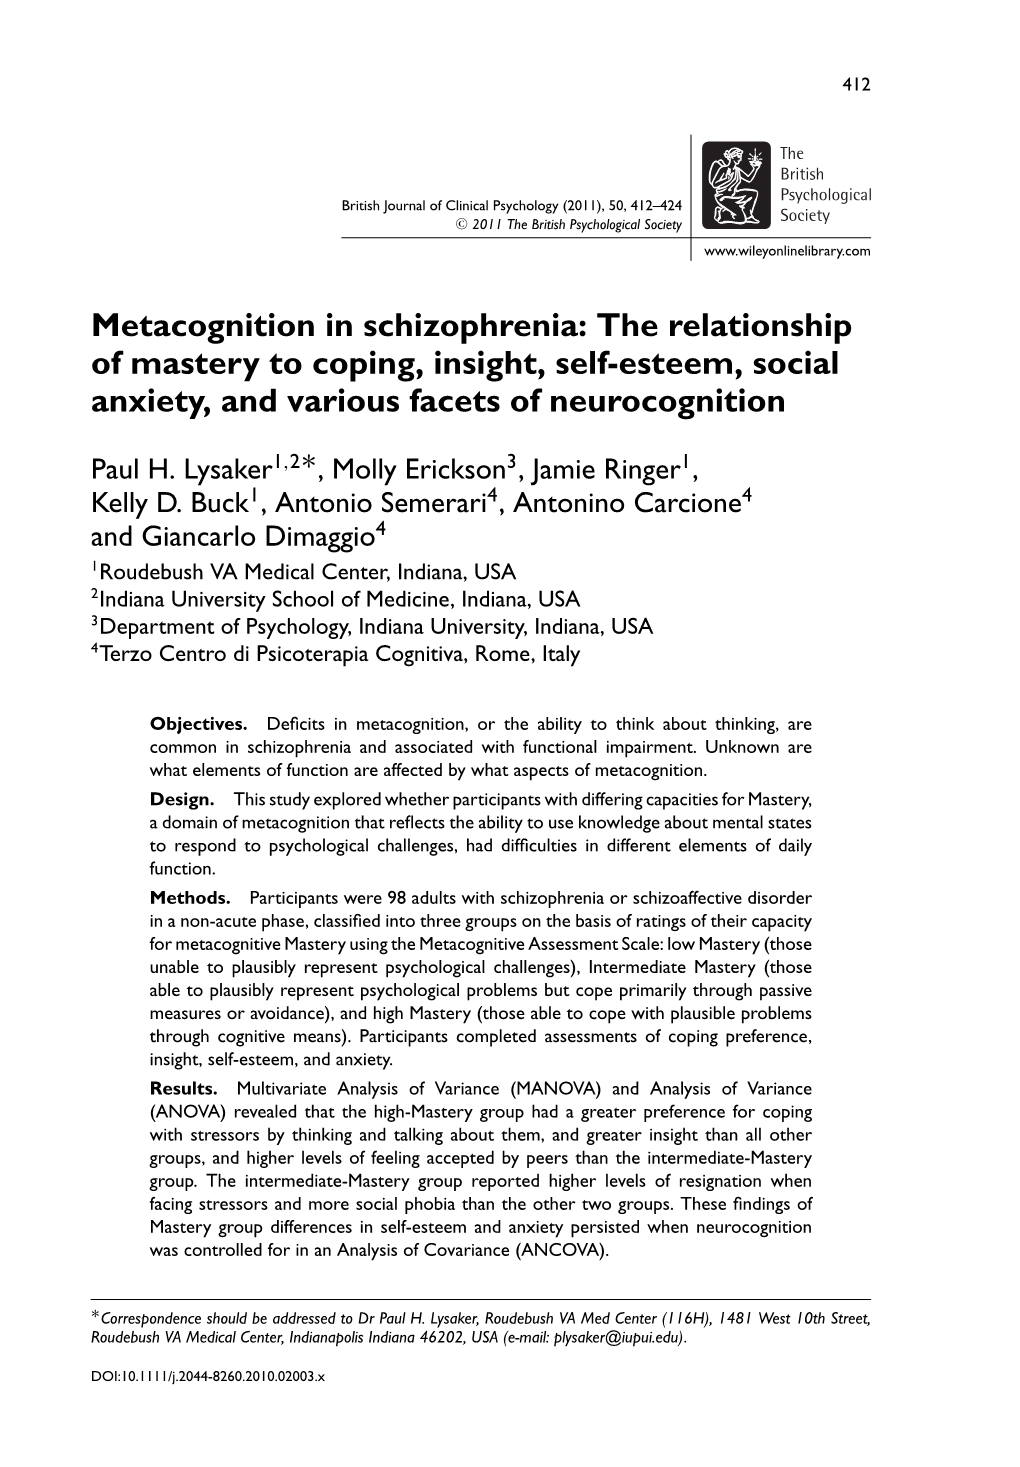 Metacognition in Schizophrenia: the Relationship of Mastery to Coping, Insight, Self-Esteem, Social Anxiety, and Various Facets of Neurocognition ∗ Paul H